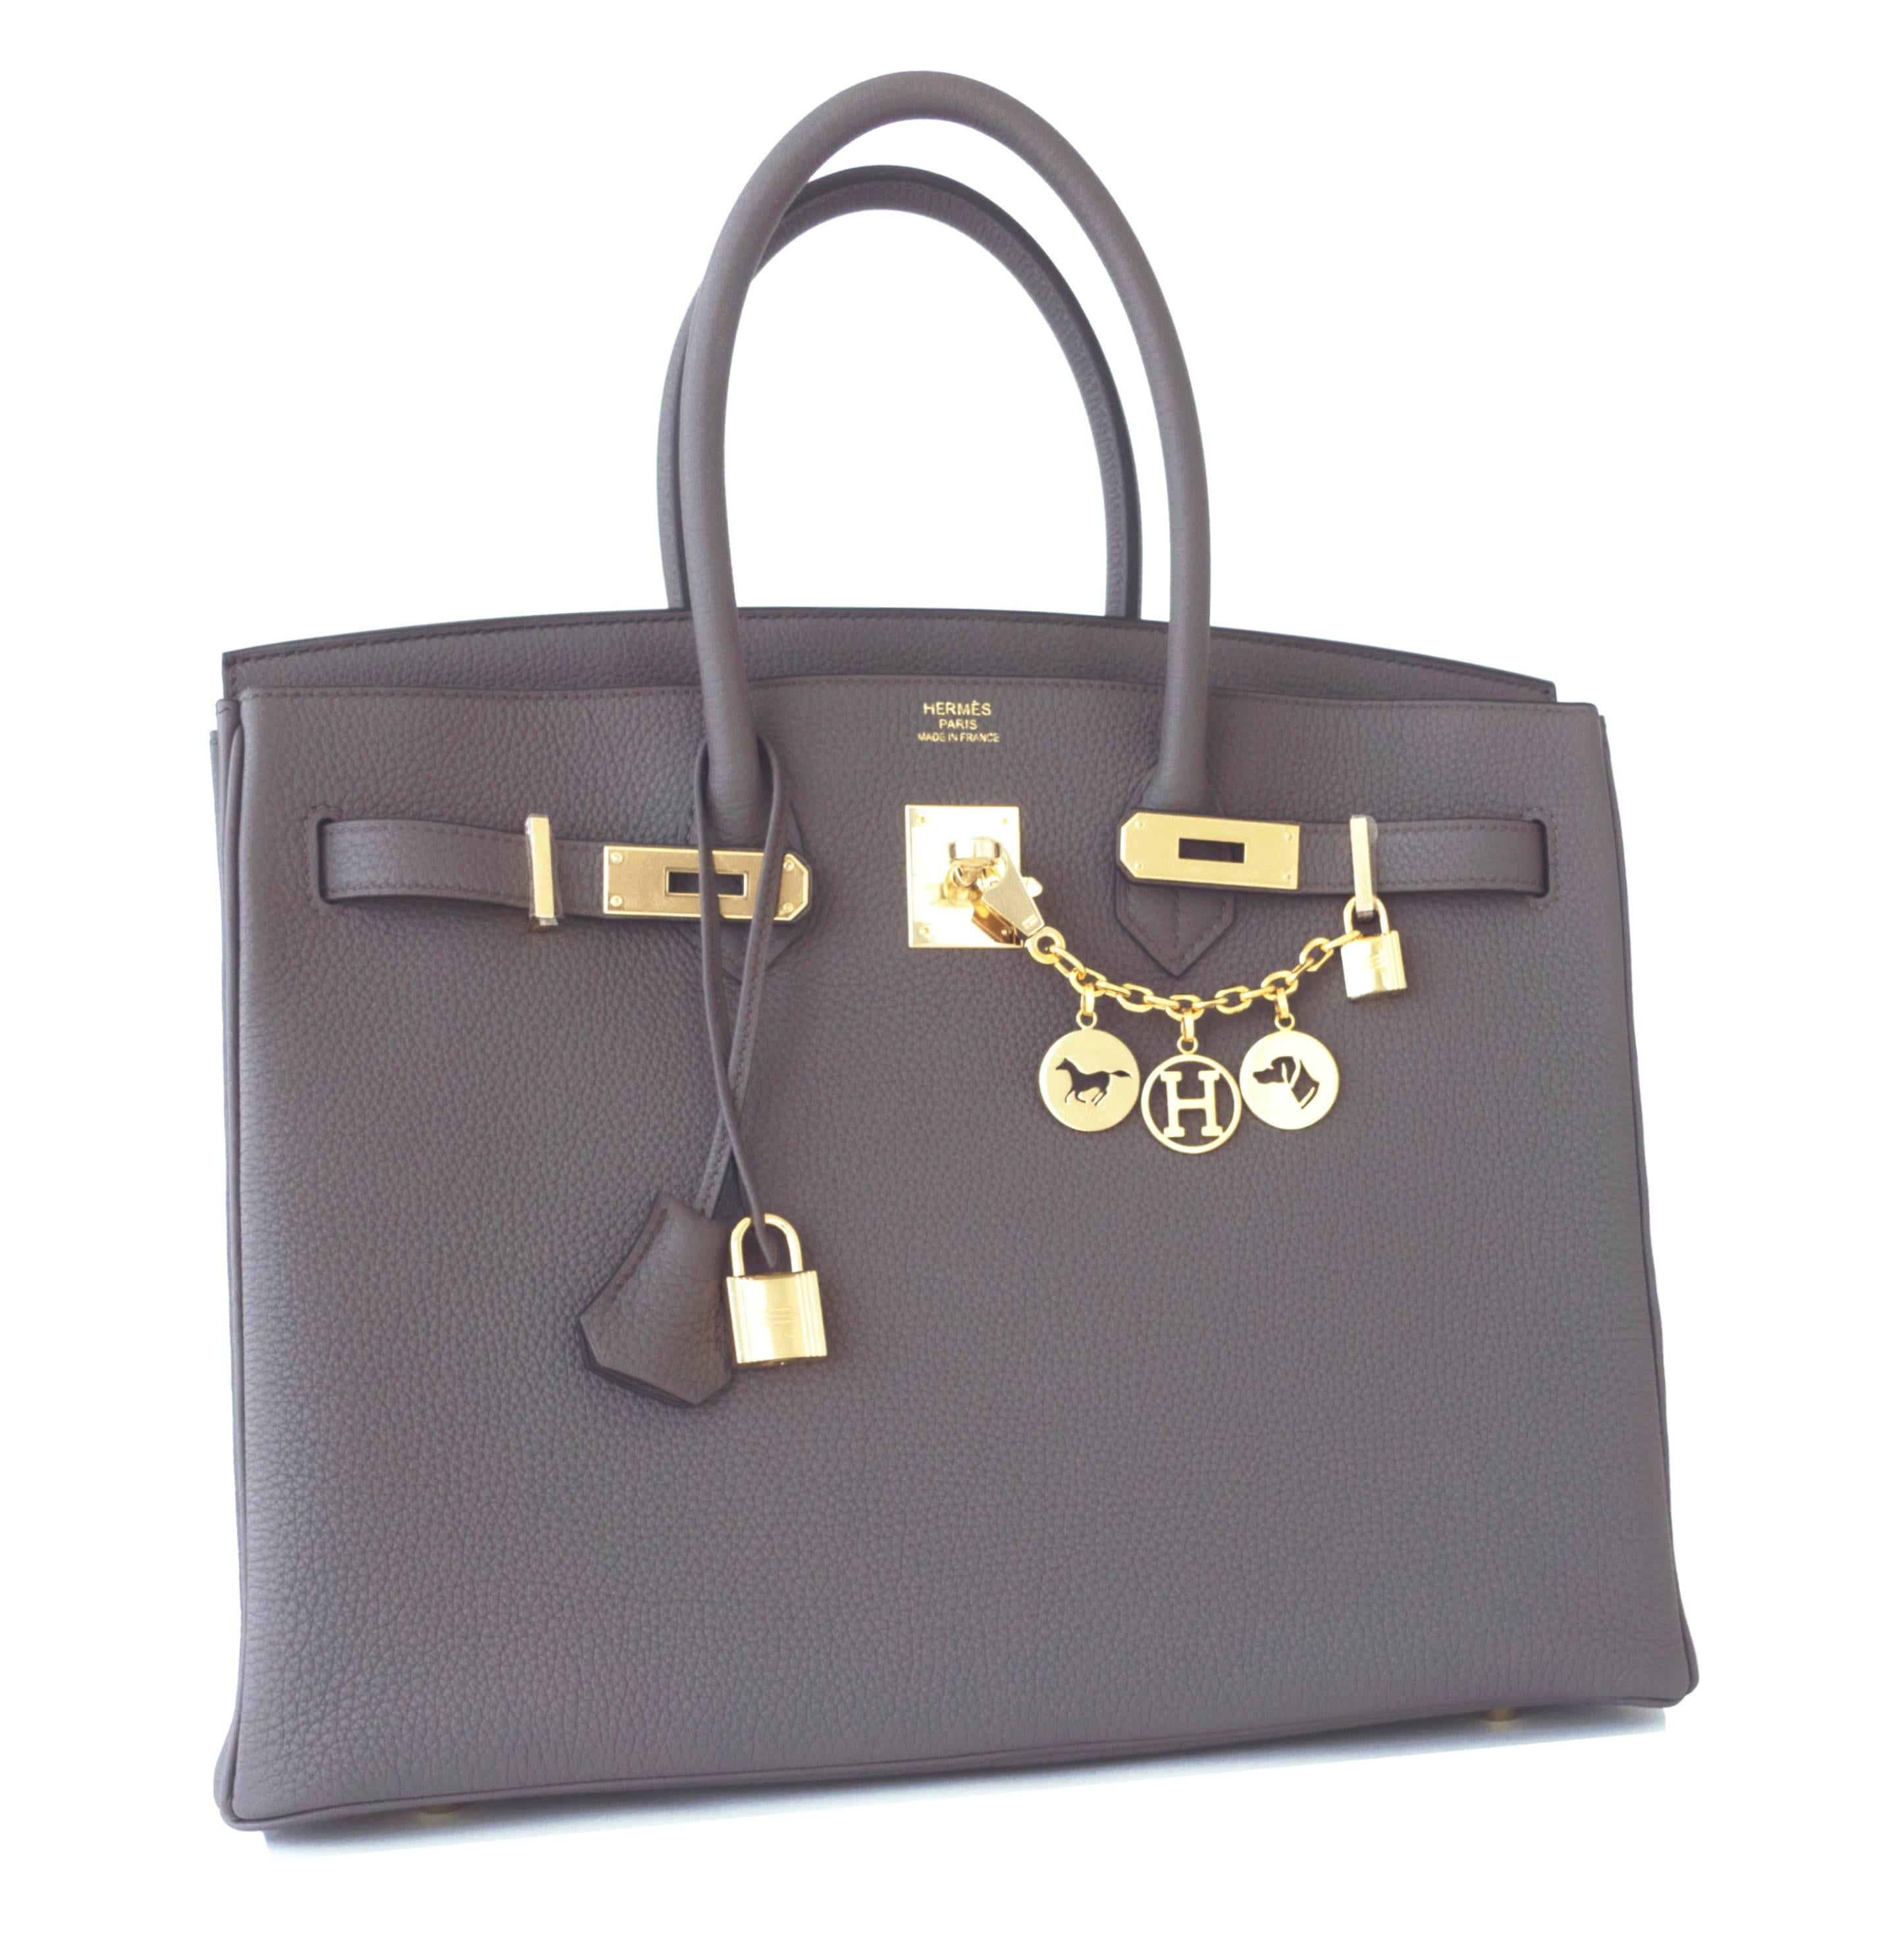 Hermes Etain Togo Tin Grey 35cm Birkin Gold Hardware NEW
Store fresh. Pristine condition (with plastic on hardware). 
Perfect gift! Comes with keys, lock, clochette, a sleeper for the bag, rain protector, and orange Hermes box. 
Etain 